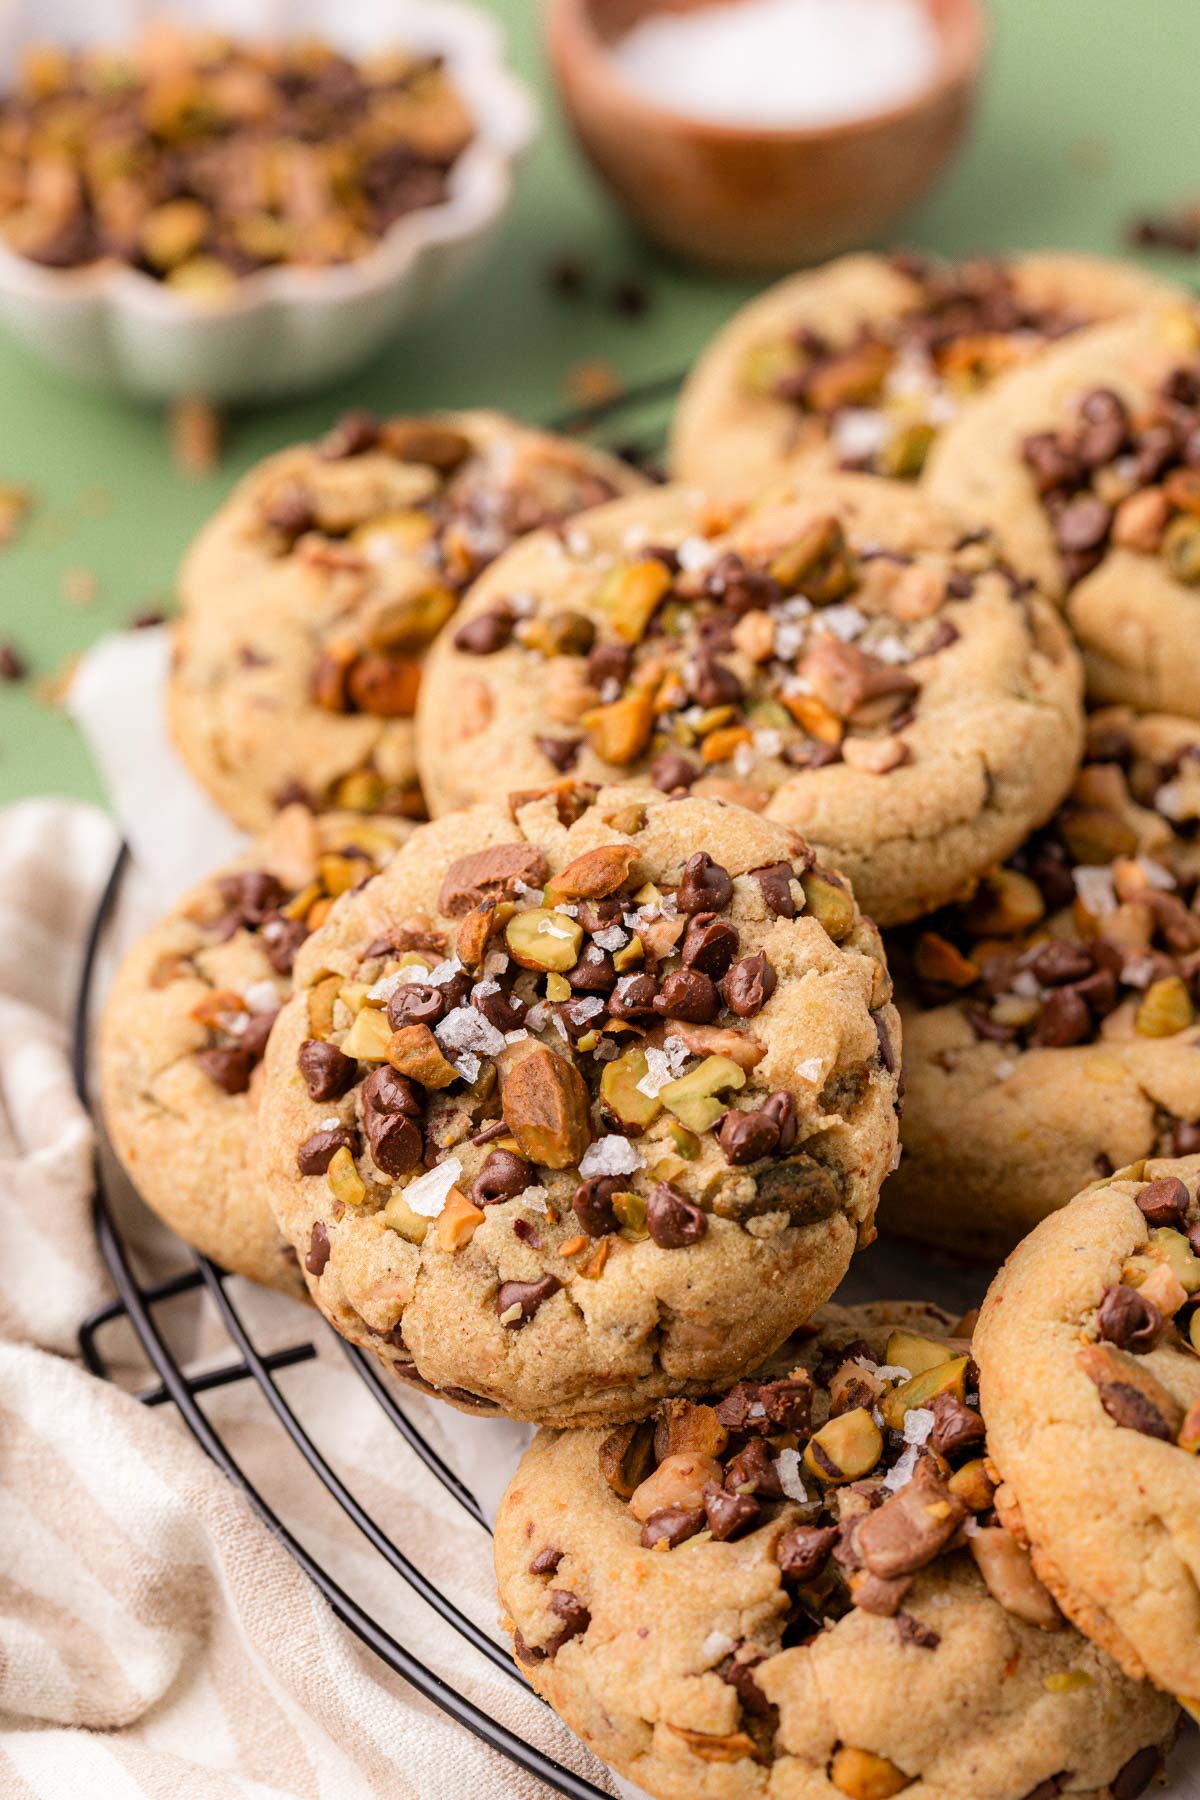 Pistachio toffee chocolate chip cookies on a wire rack.